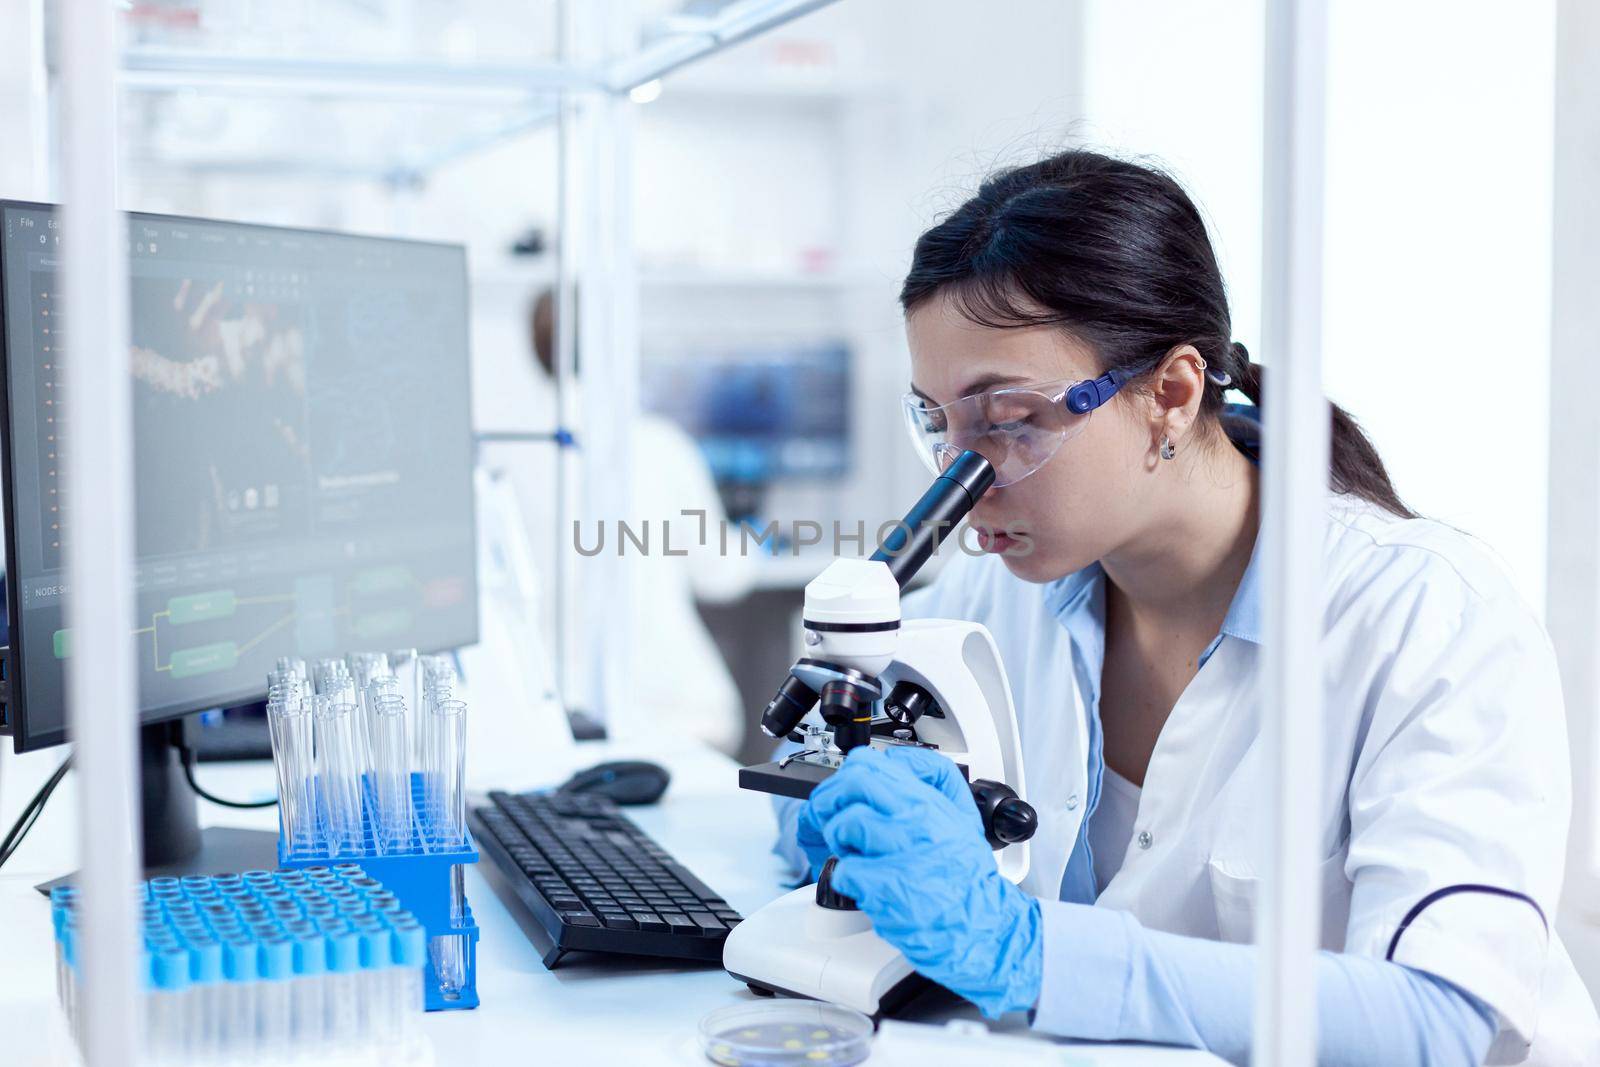 Microbiologist in research laboratory doing scientific experiments looking through microscop. Chemist wearing lab coat using modern technology during scientific experiment in sterile environment.